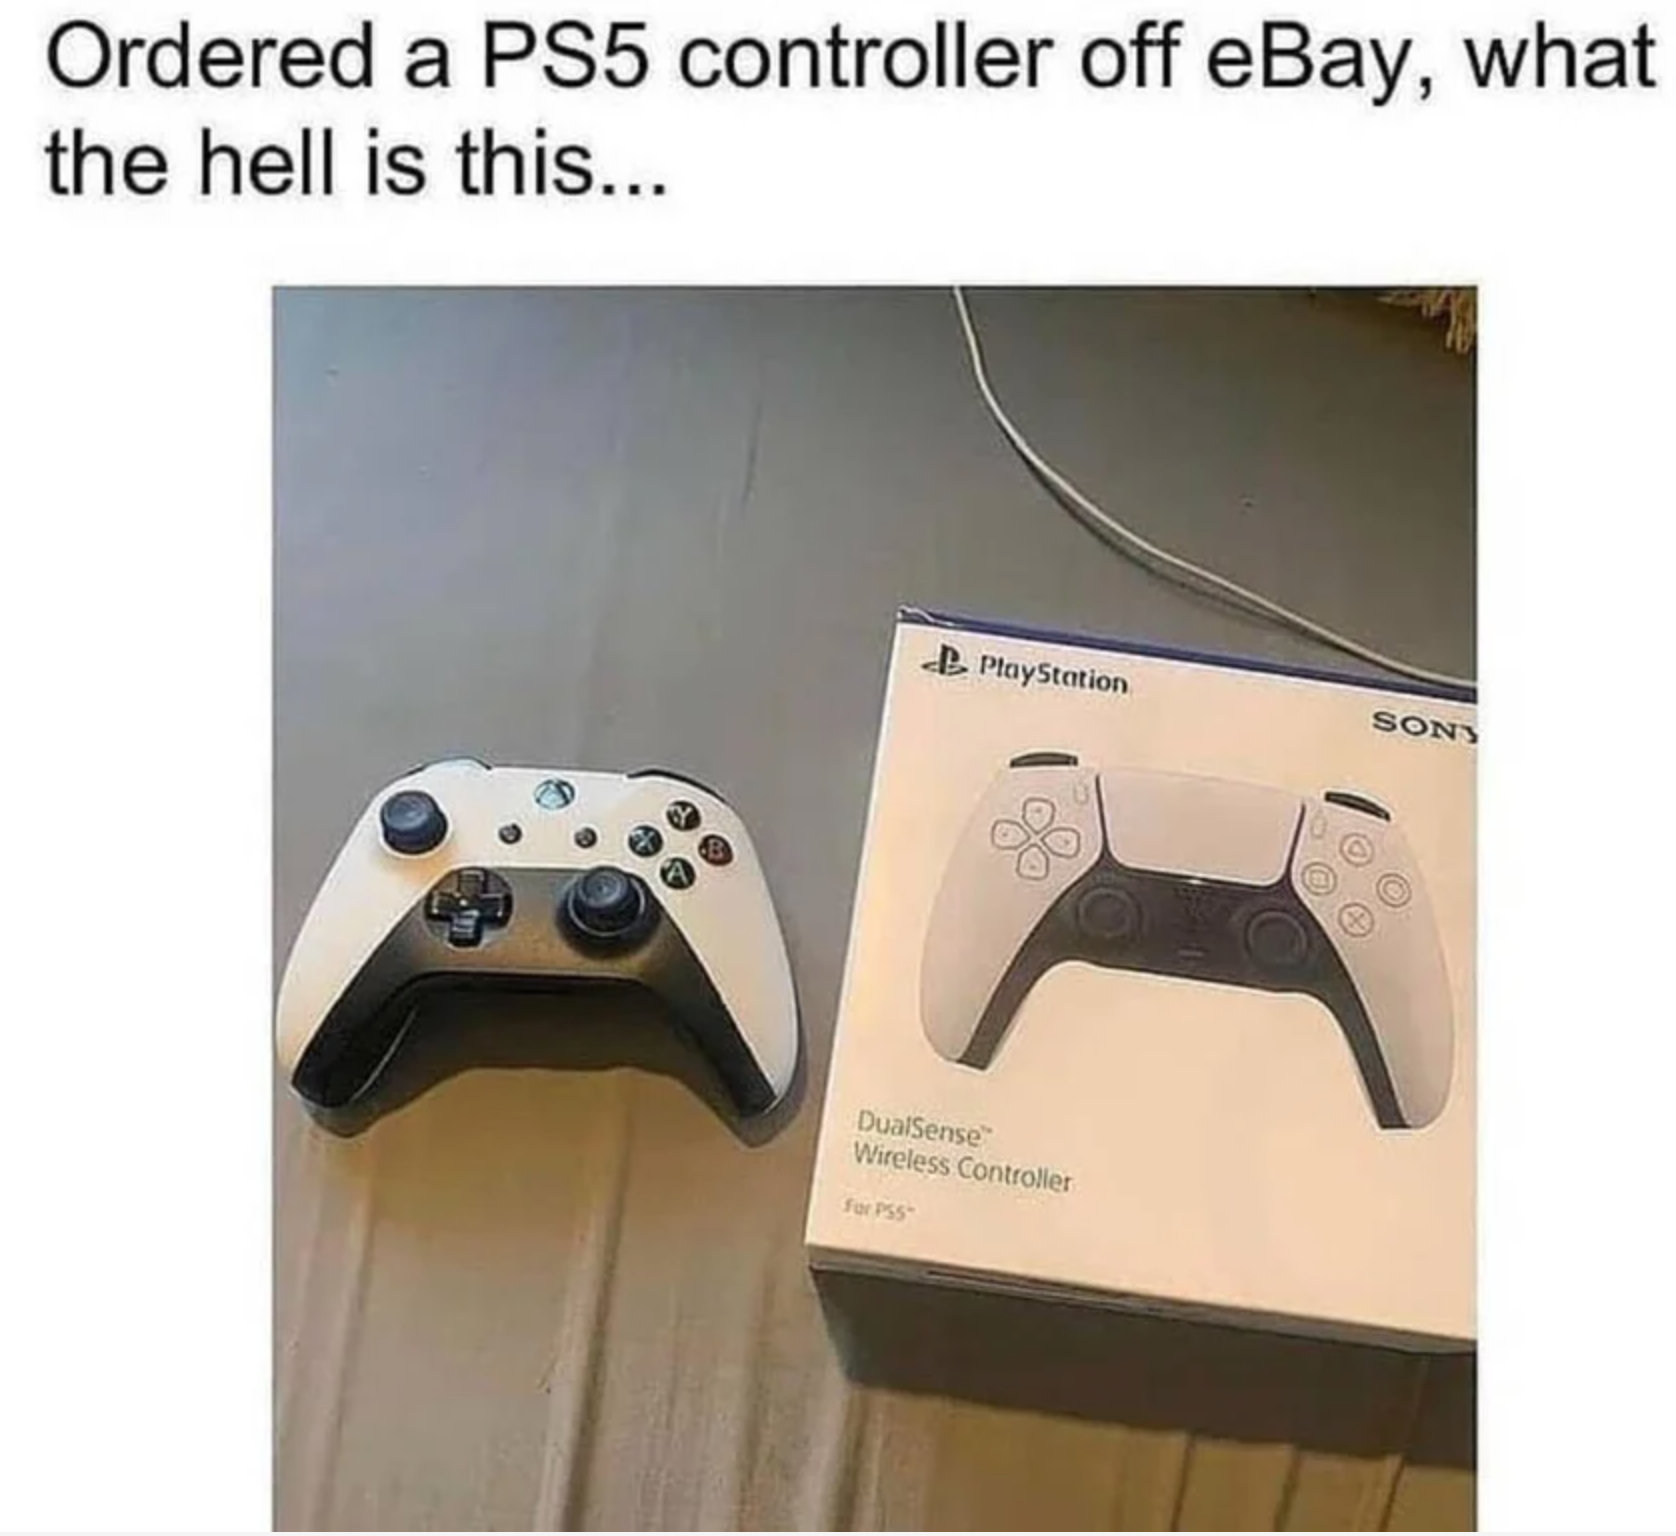 funny gaming memes  - ps5 controller like xbox - Ordered a PS5 controller off eBay, what the hell is this... PlayStation Sons Qu 5 g Wiess Controller